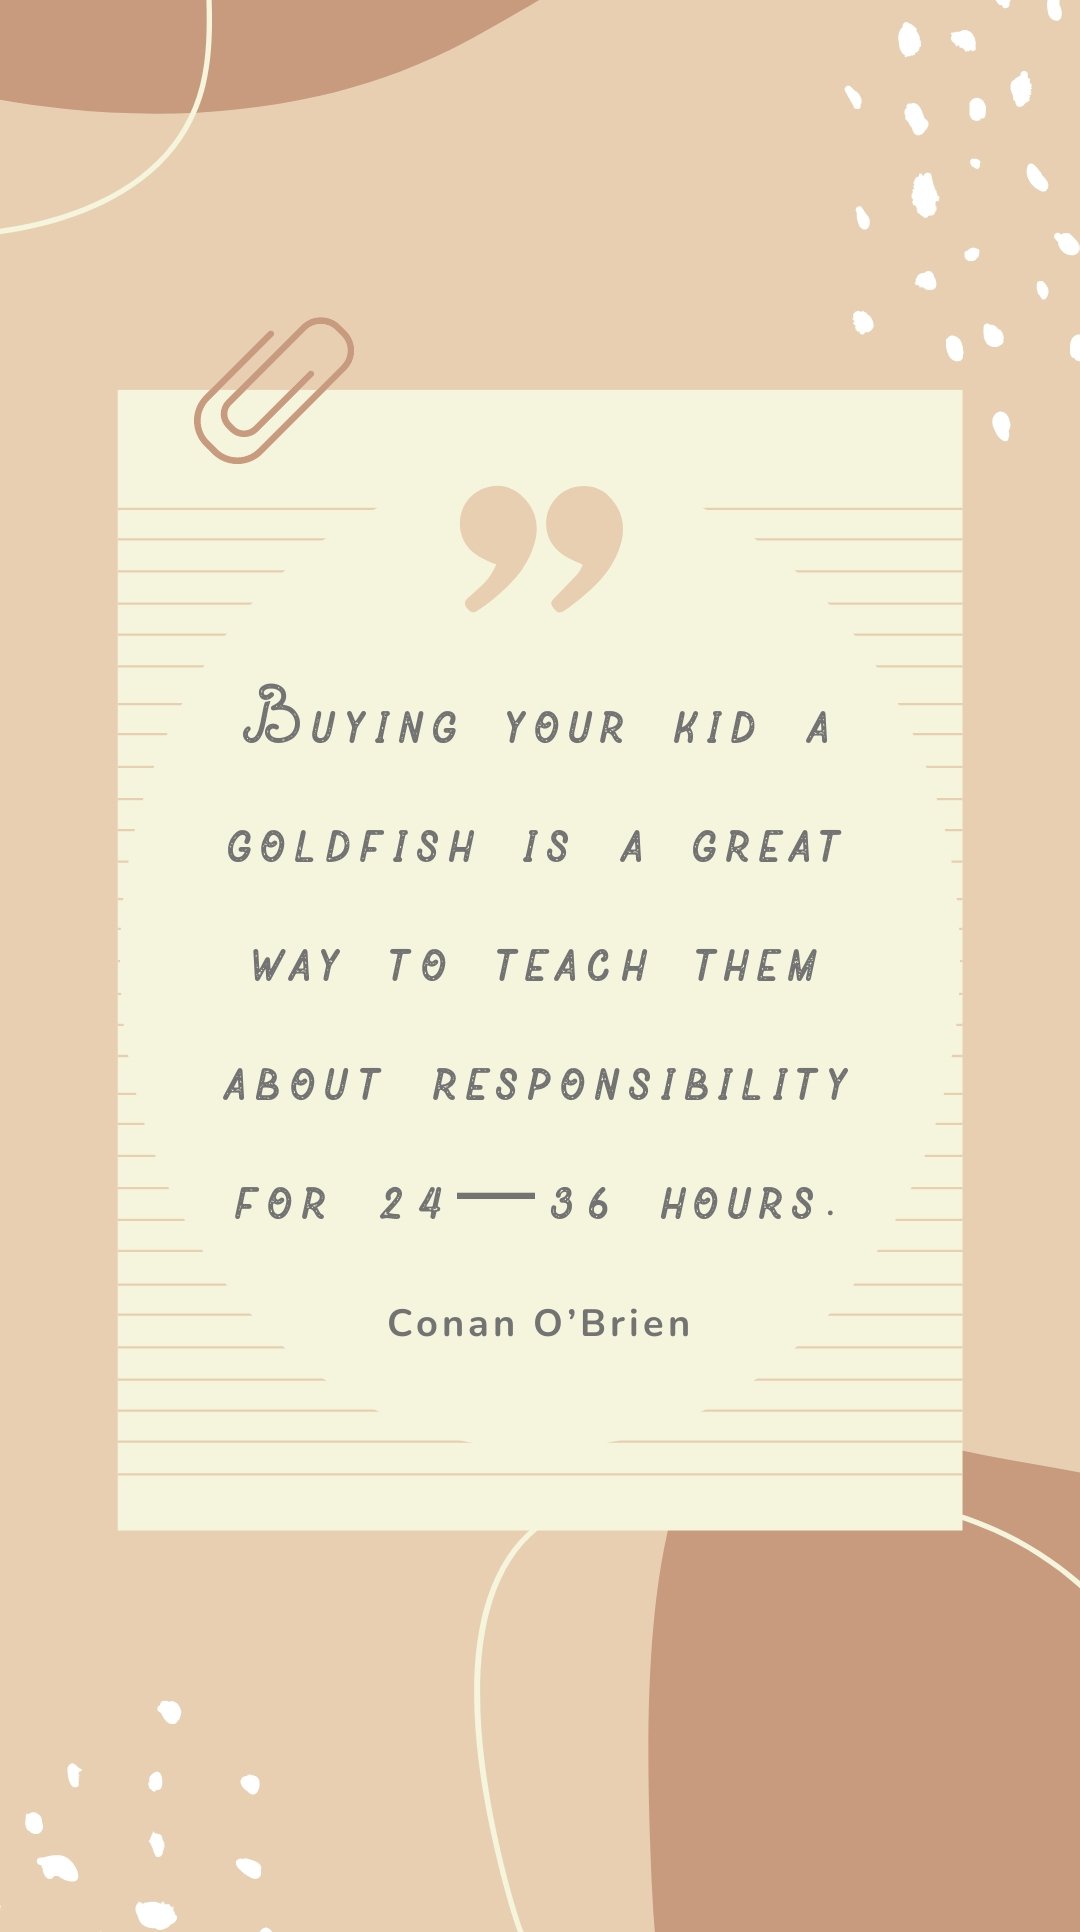 Conan O’Brien - Buying your kid a goldfish is a great way to teach them about responsibility for 24—36 hours.